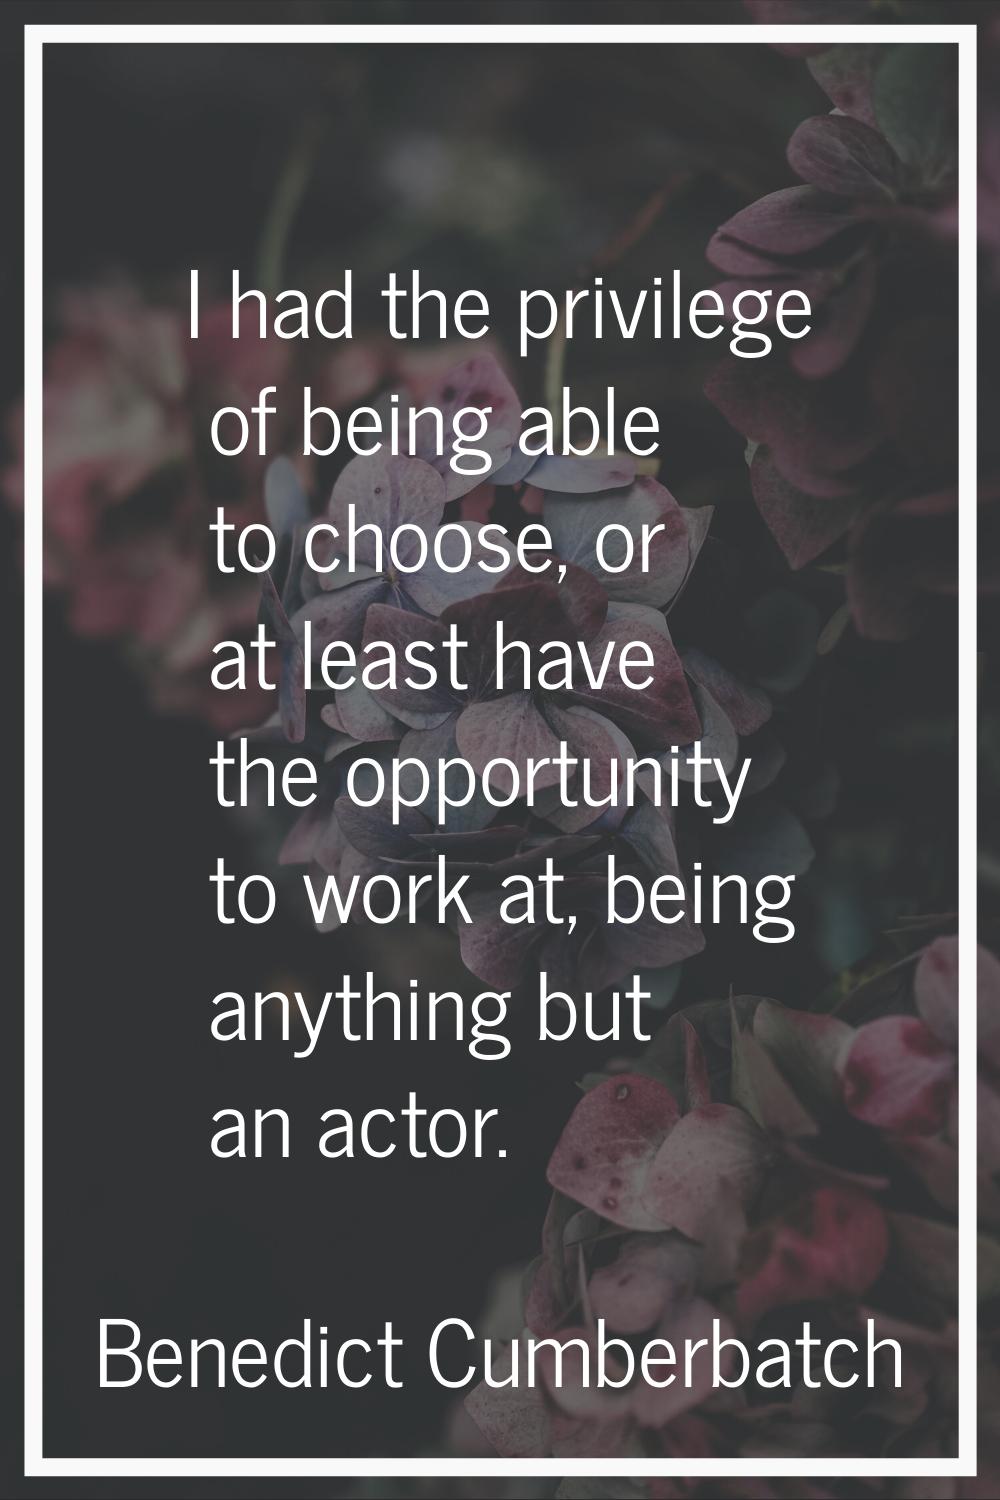 I had the privilege of being able to choose, or at least have the opportunity to work at, being any